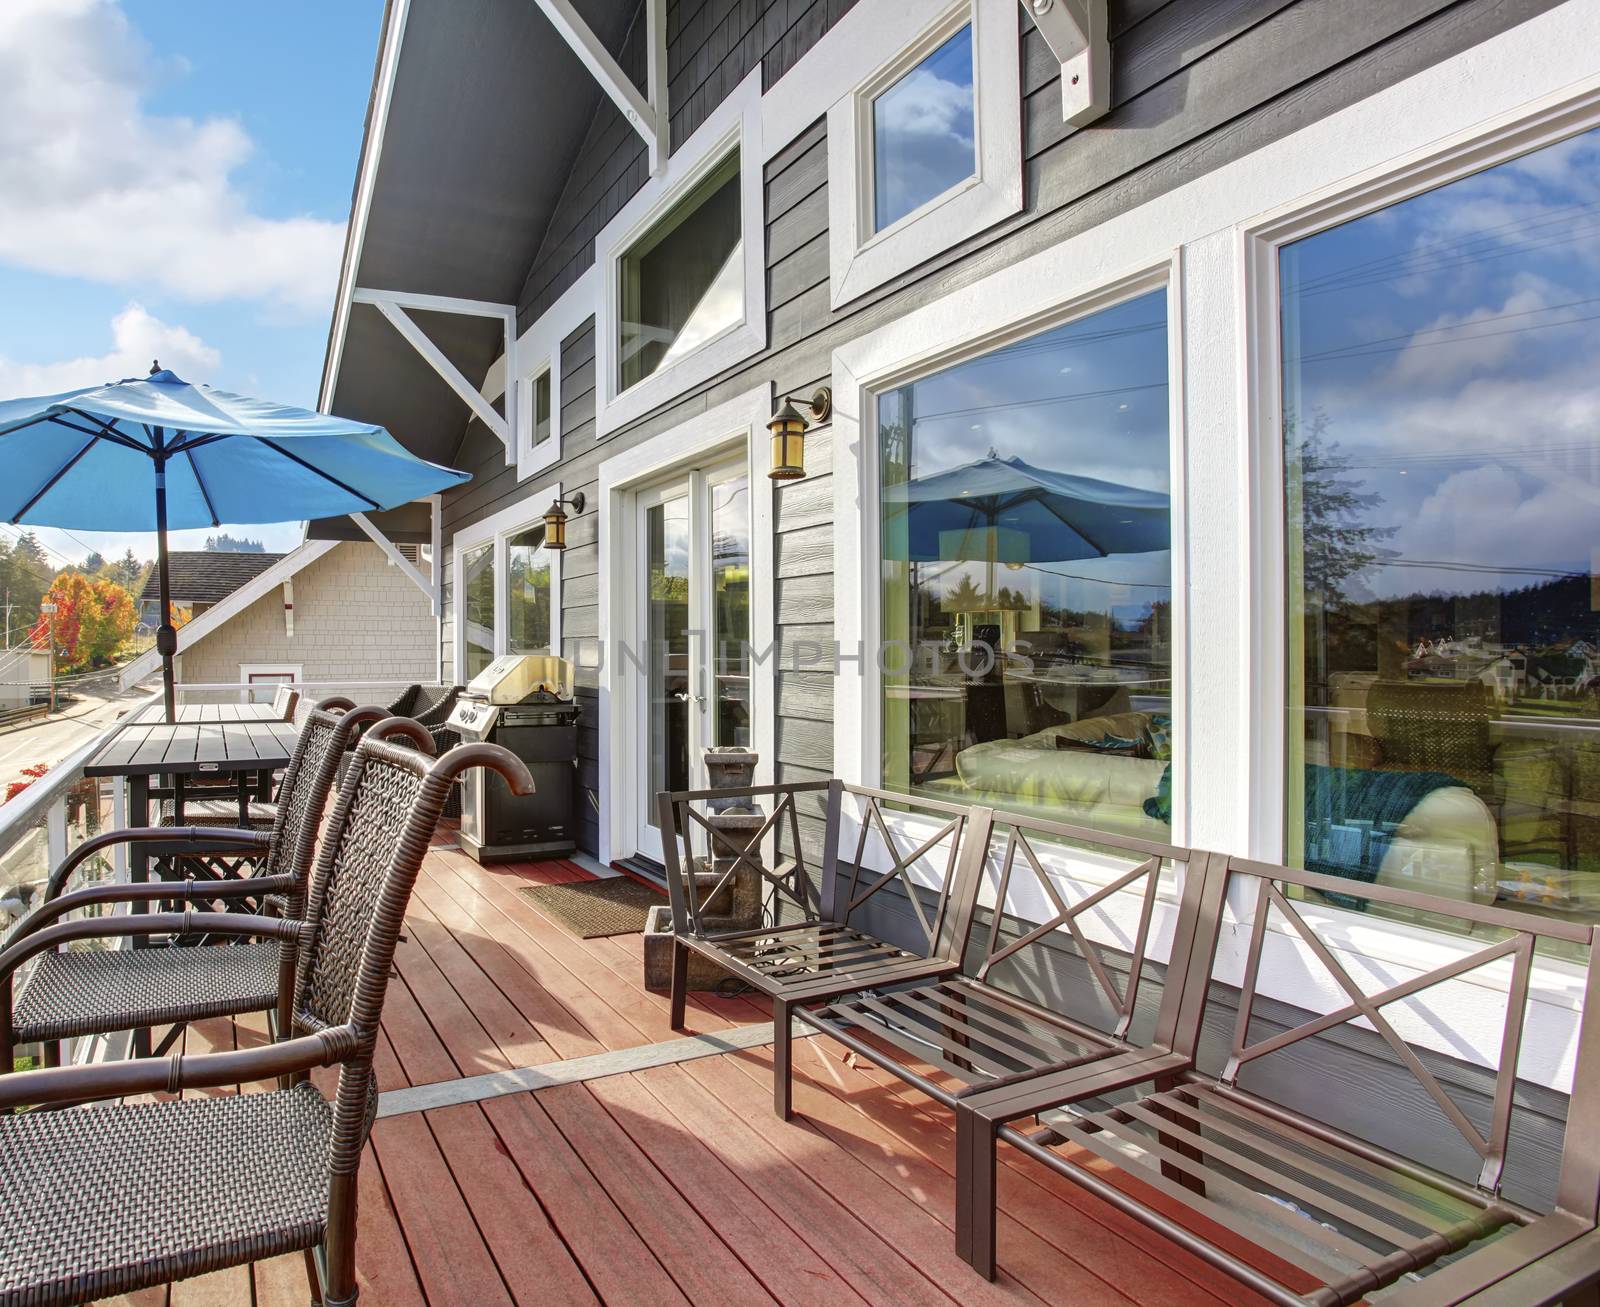 Northwest traditional wooden deck with water veiw. windows and chairs.